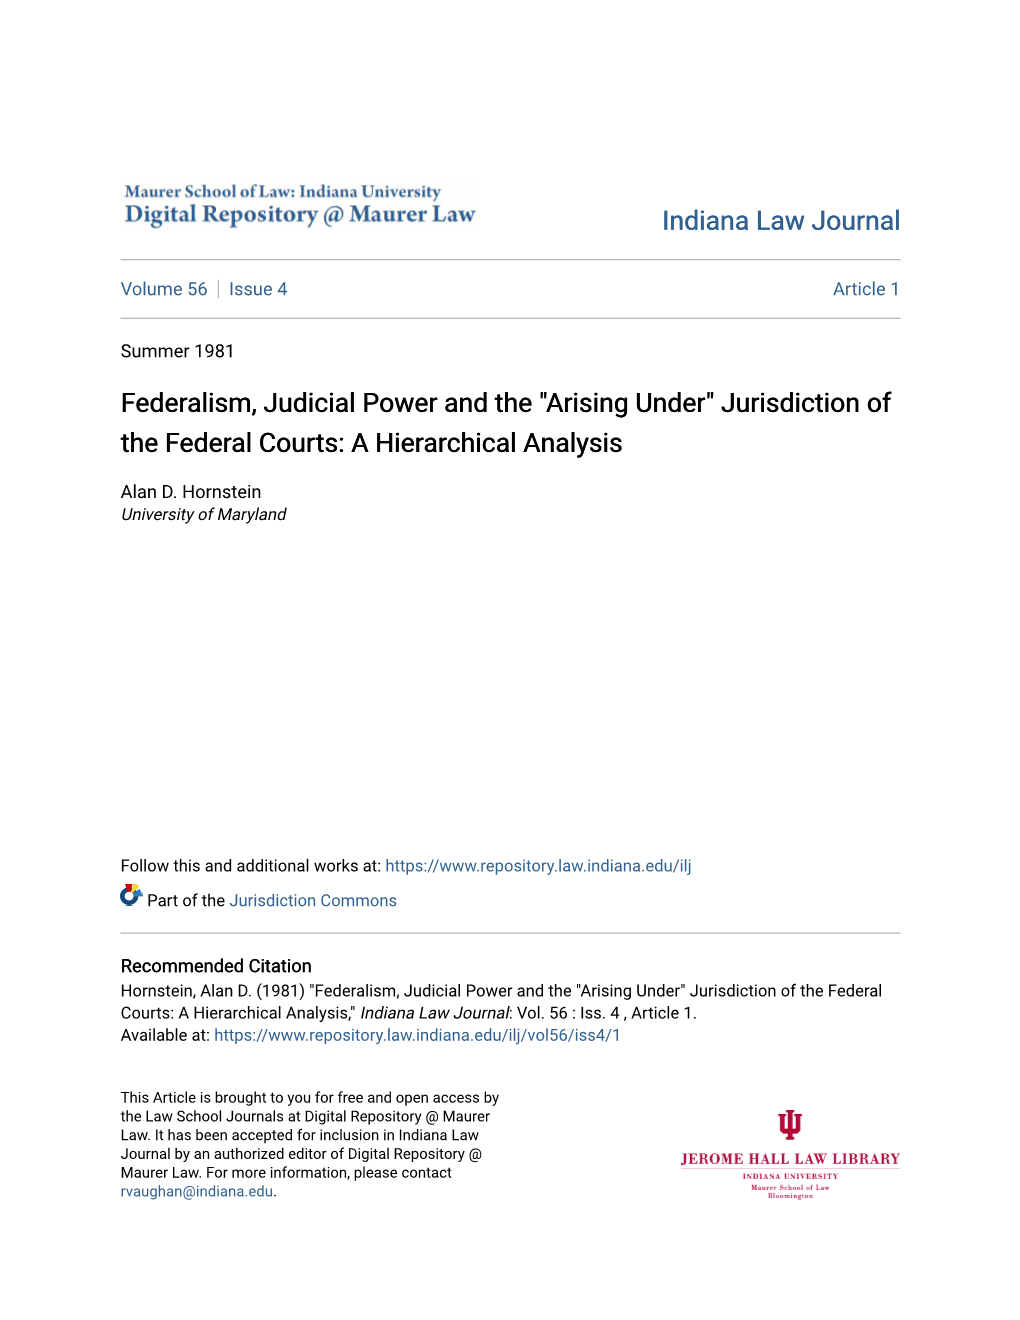 "Arising Under" Jurisdiction of the Federal Courts: a Hierarchical Analysis